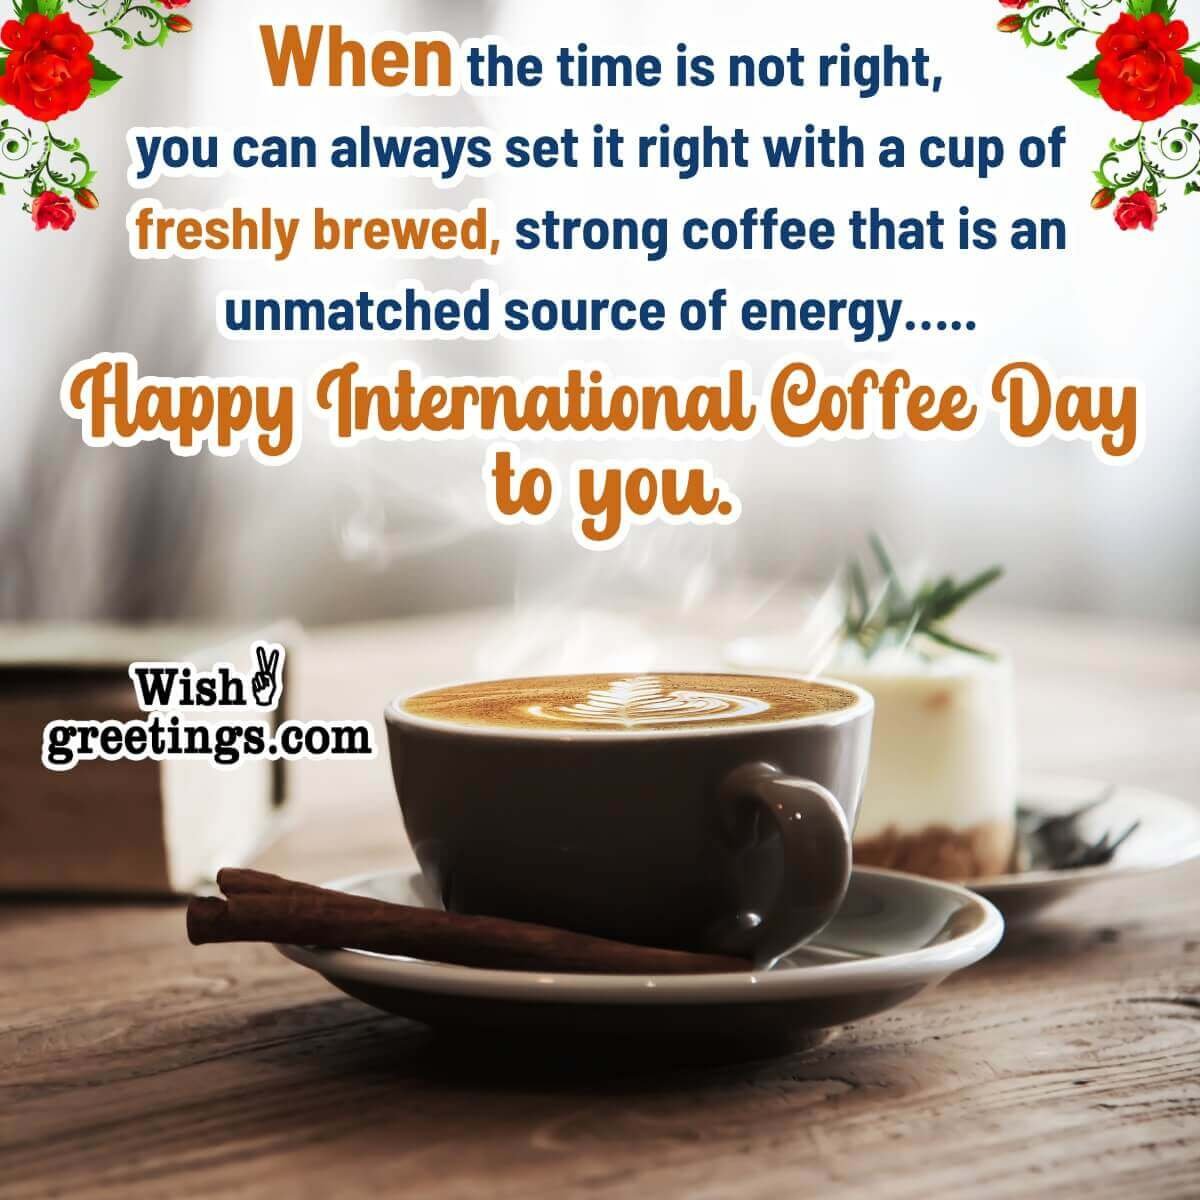 Happy International Coffee Day Message Image